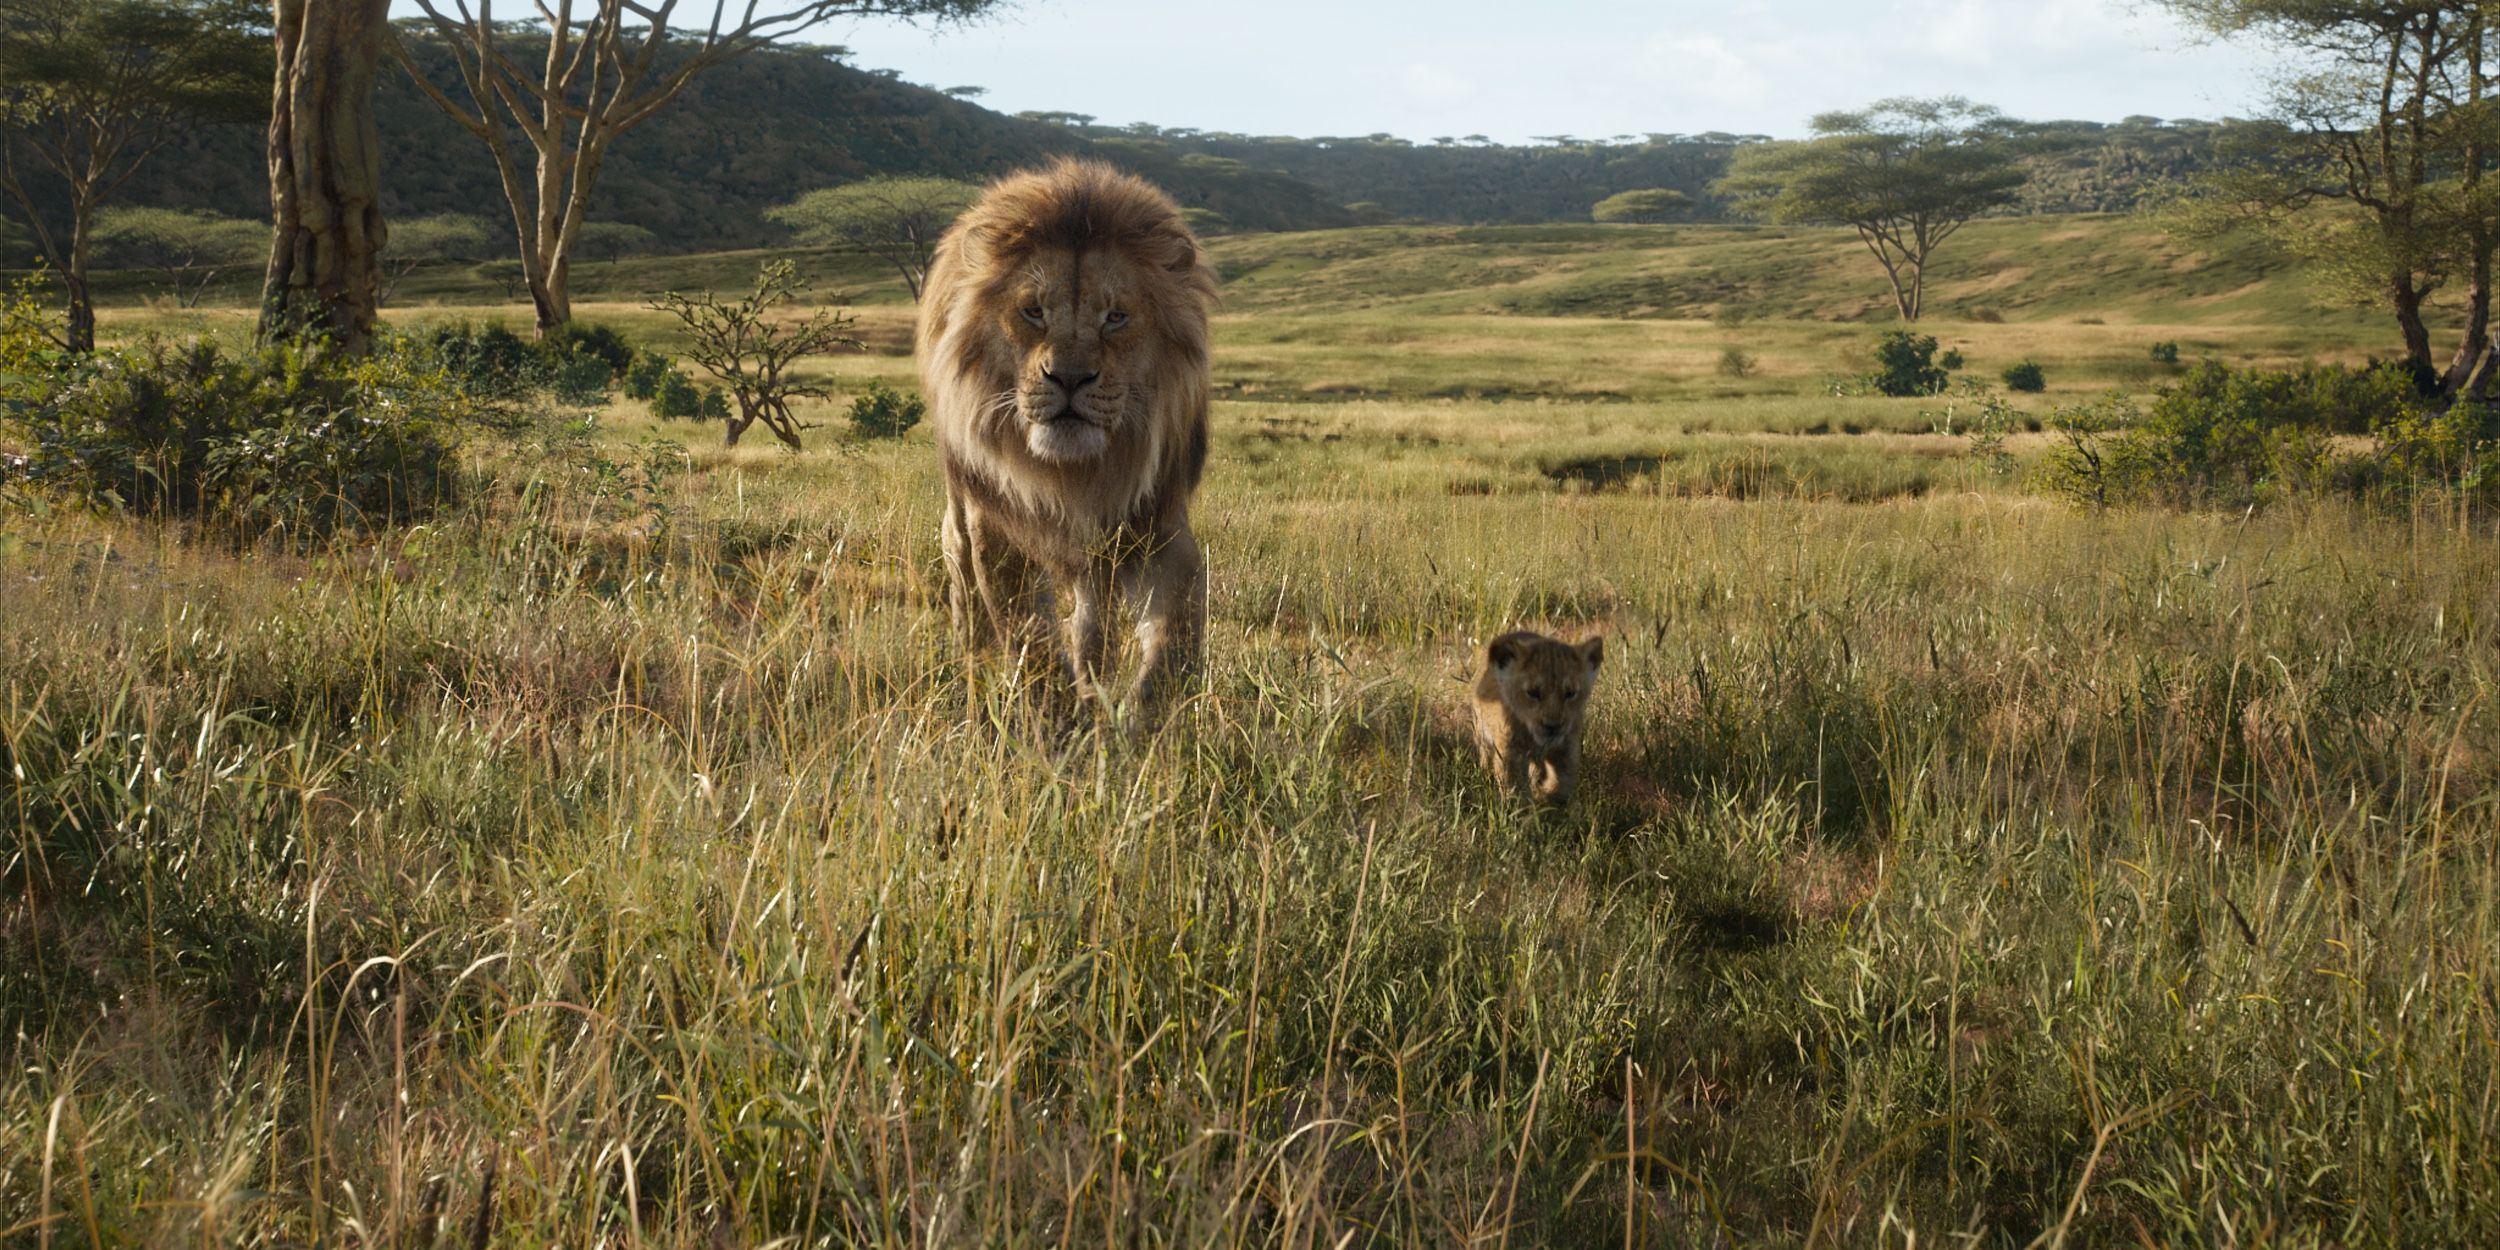 Everything You Need To Know About The Lion King 2